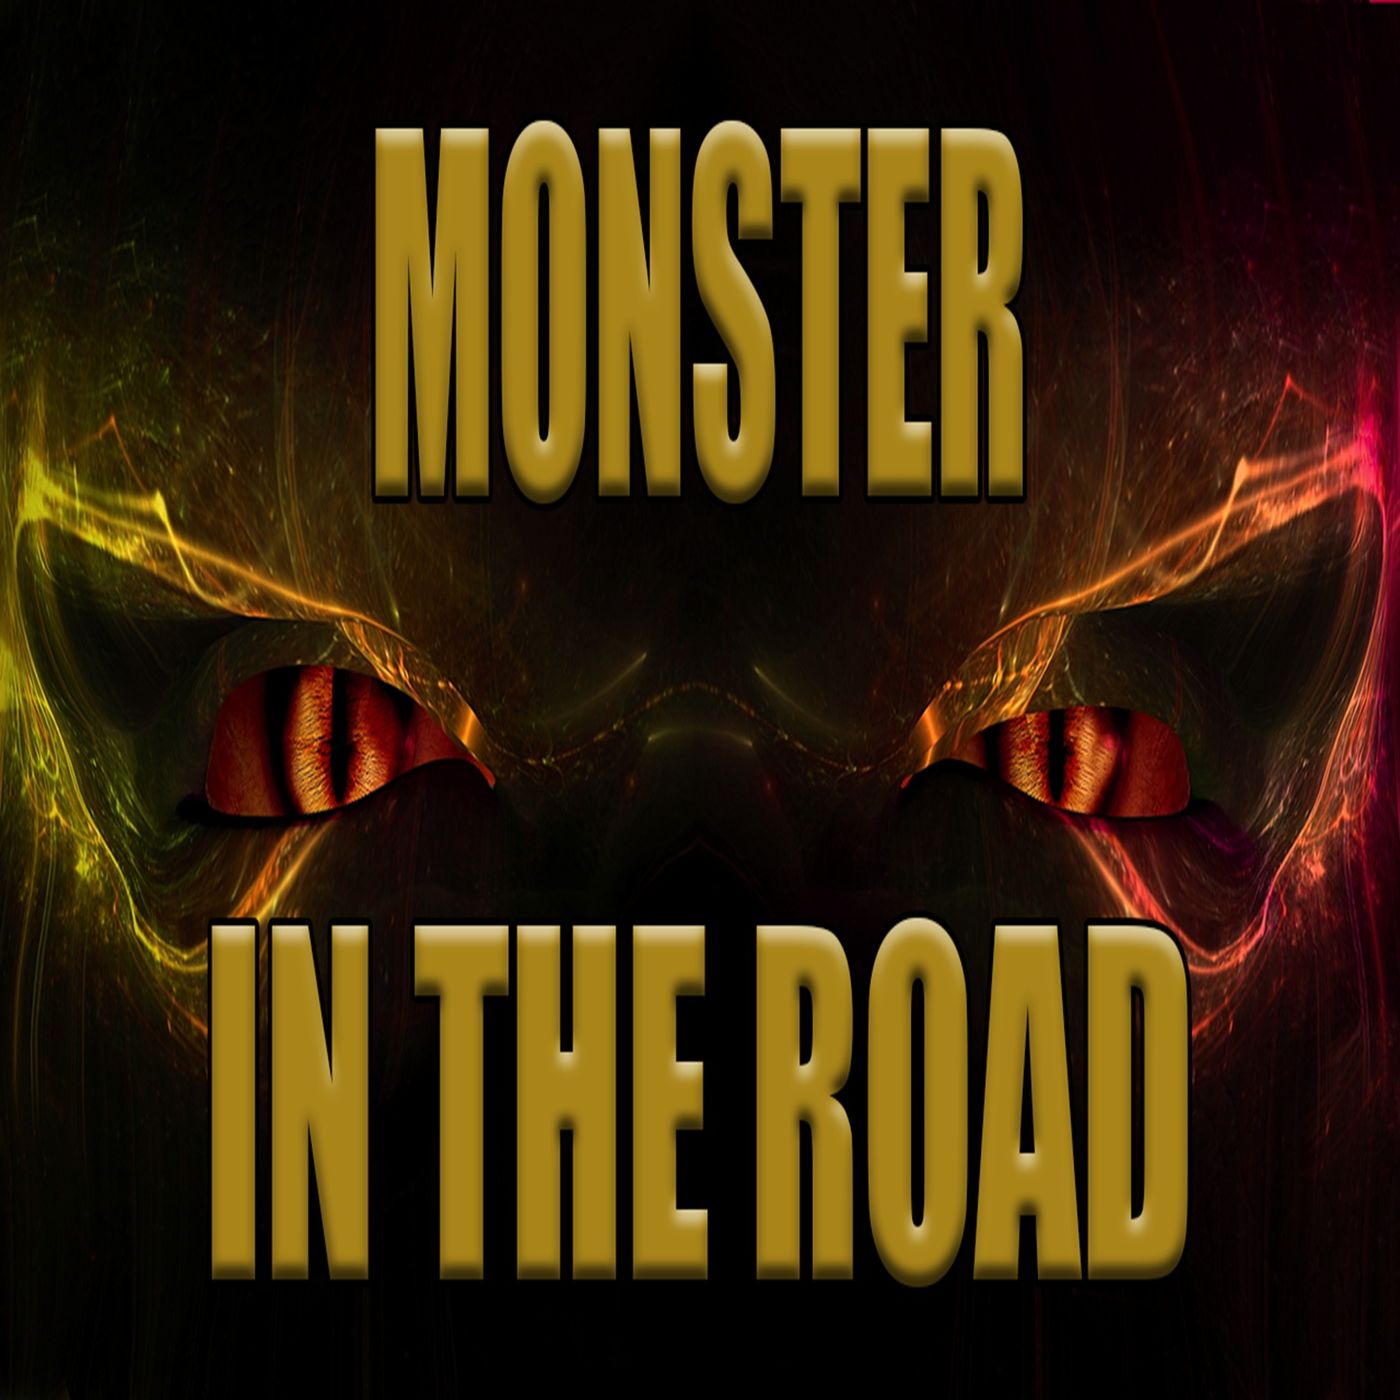 The Monster in the Road